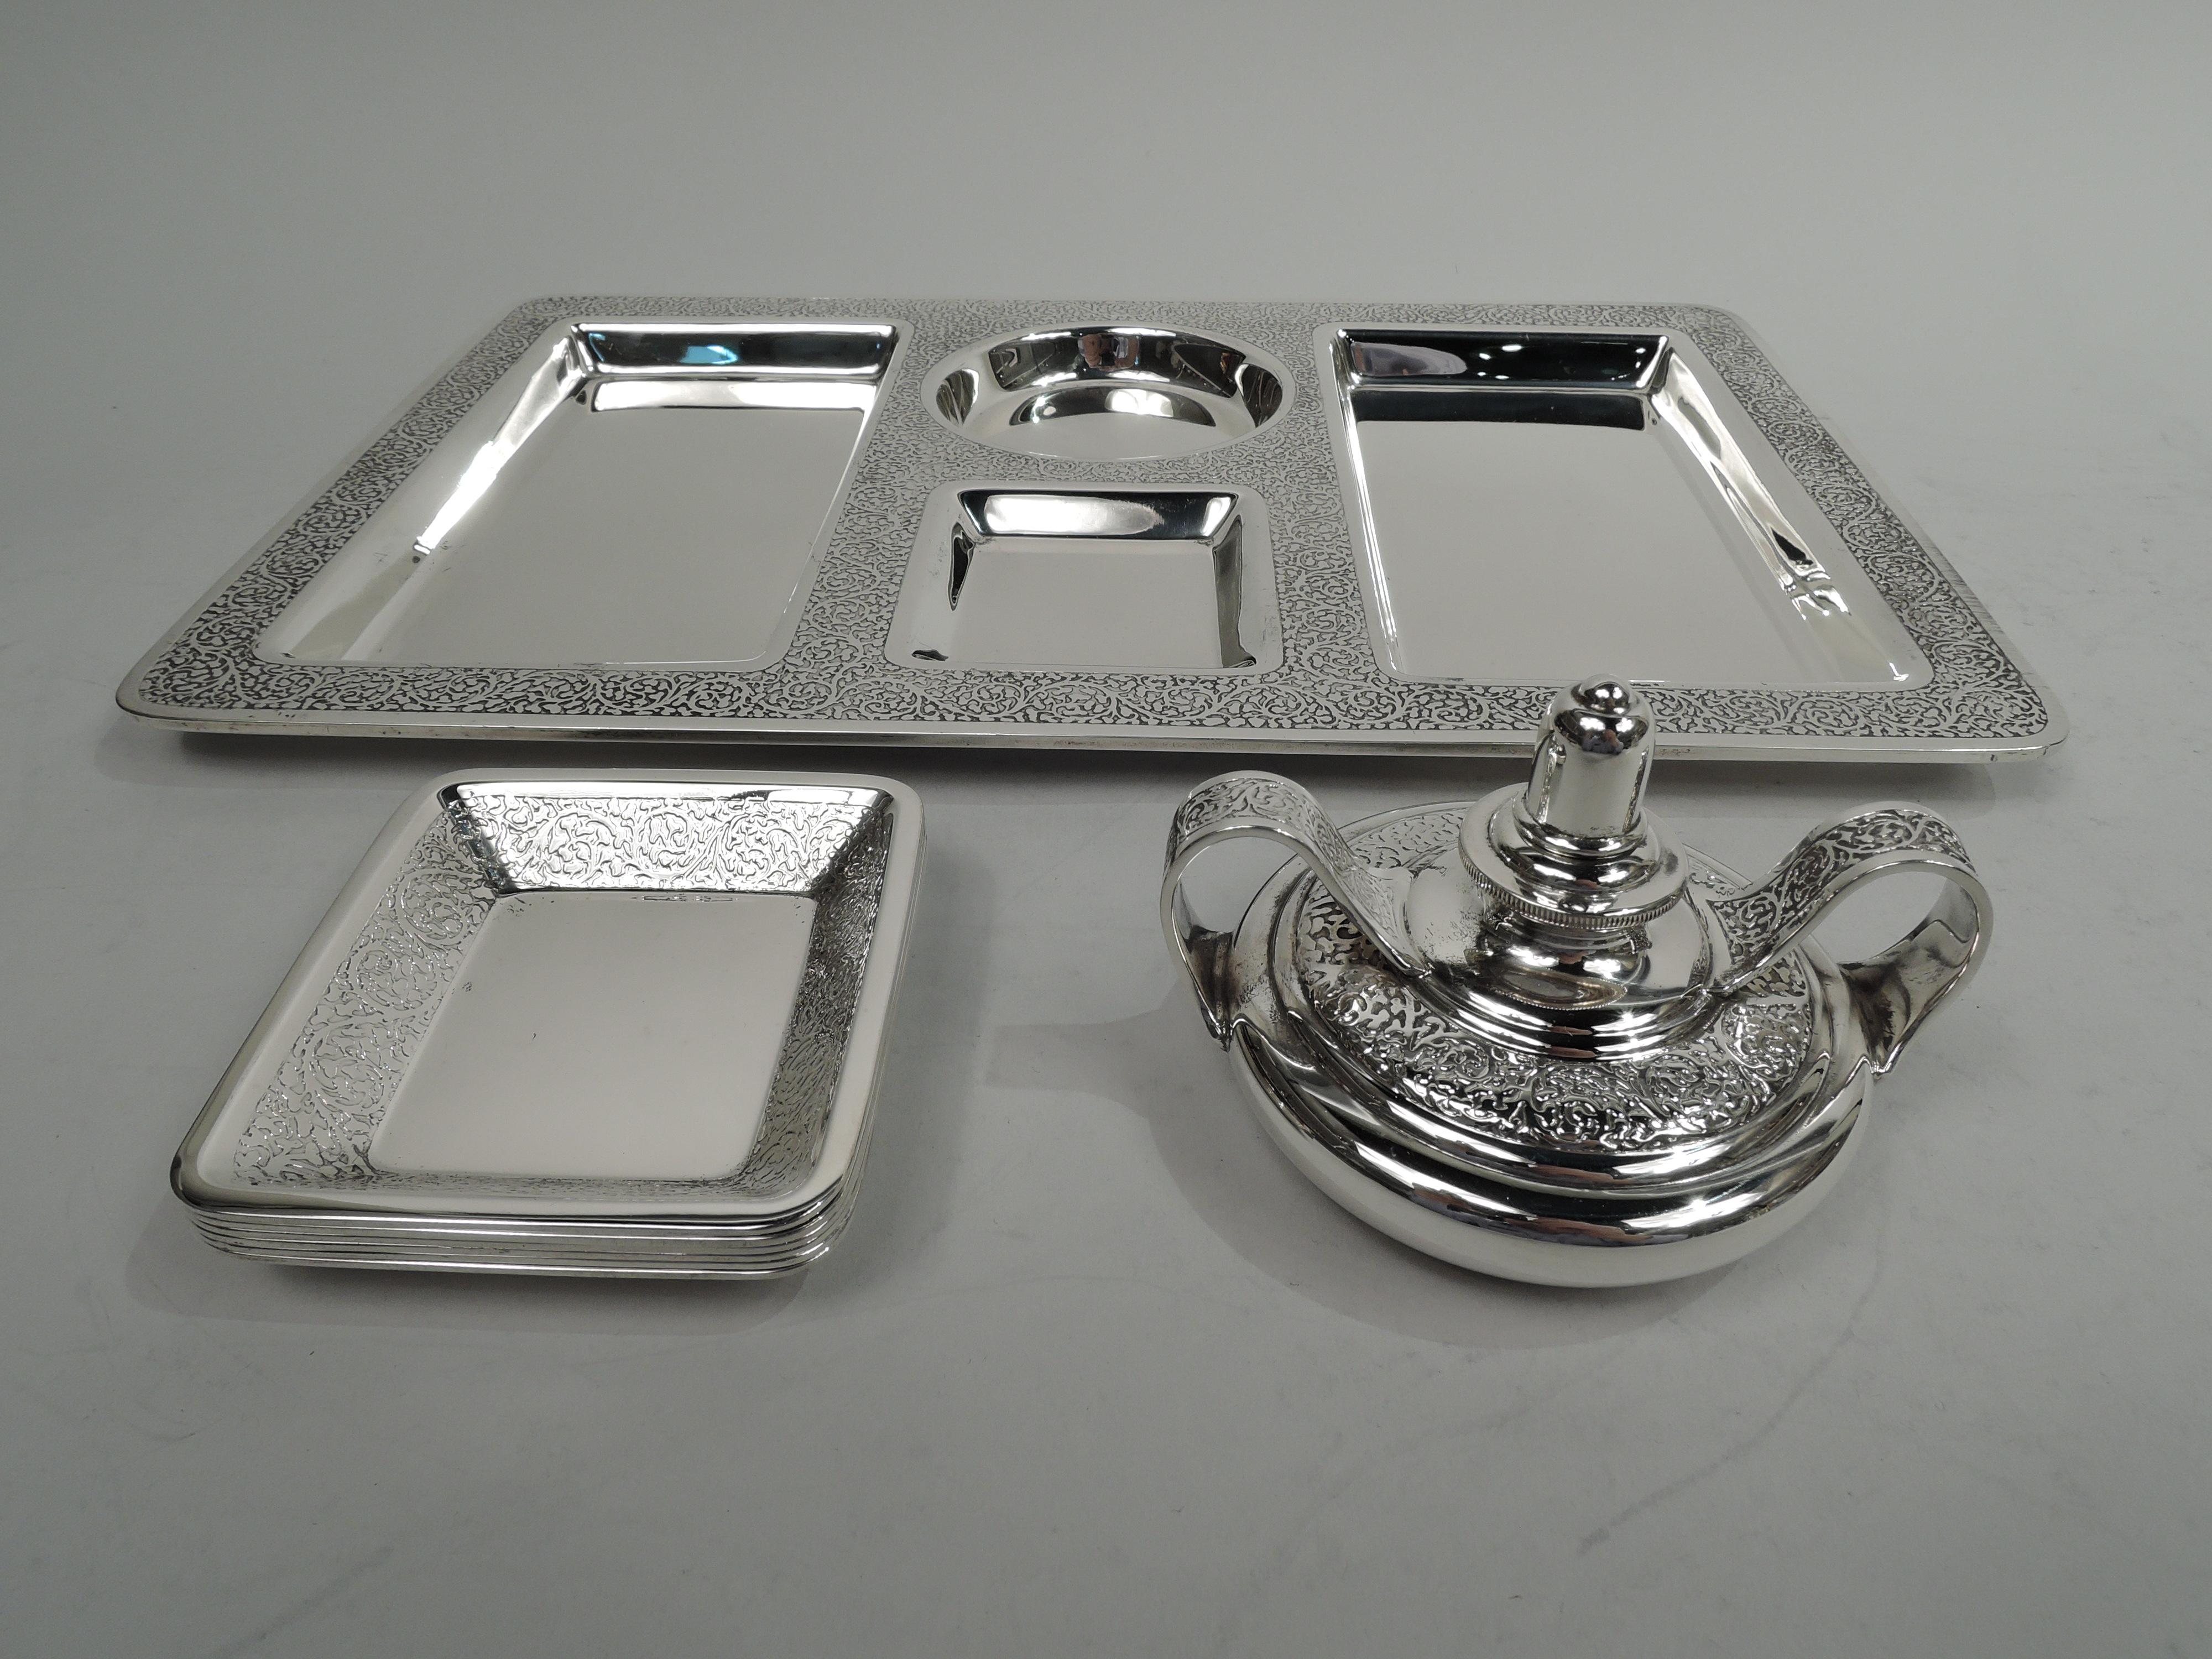 Art Deco sterling silver cigar set. Made by Tiffany & Co. in New York, circa 1920. This set comprises, tray, lighter, and 6 ashtrays. Tray rectangular with rounded corners and flat rim. Two central wells of which one rectangular for ashtrays and one